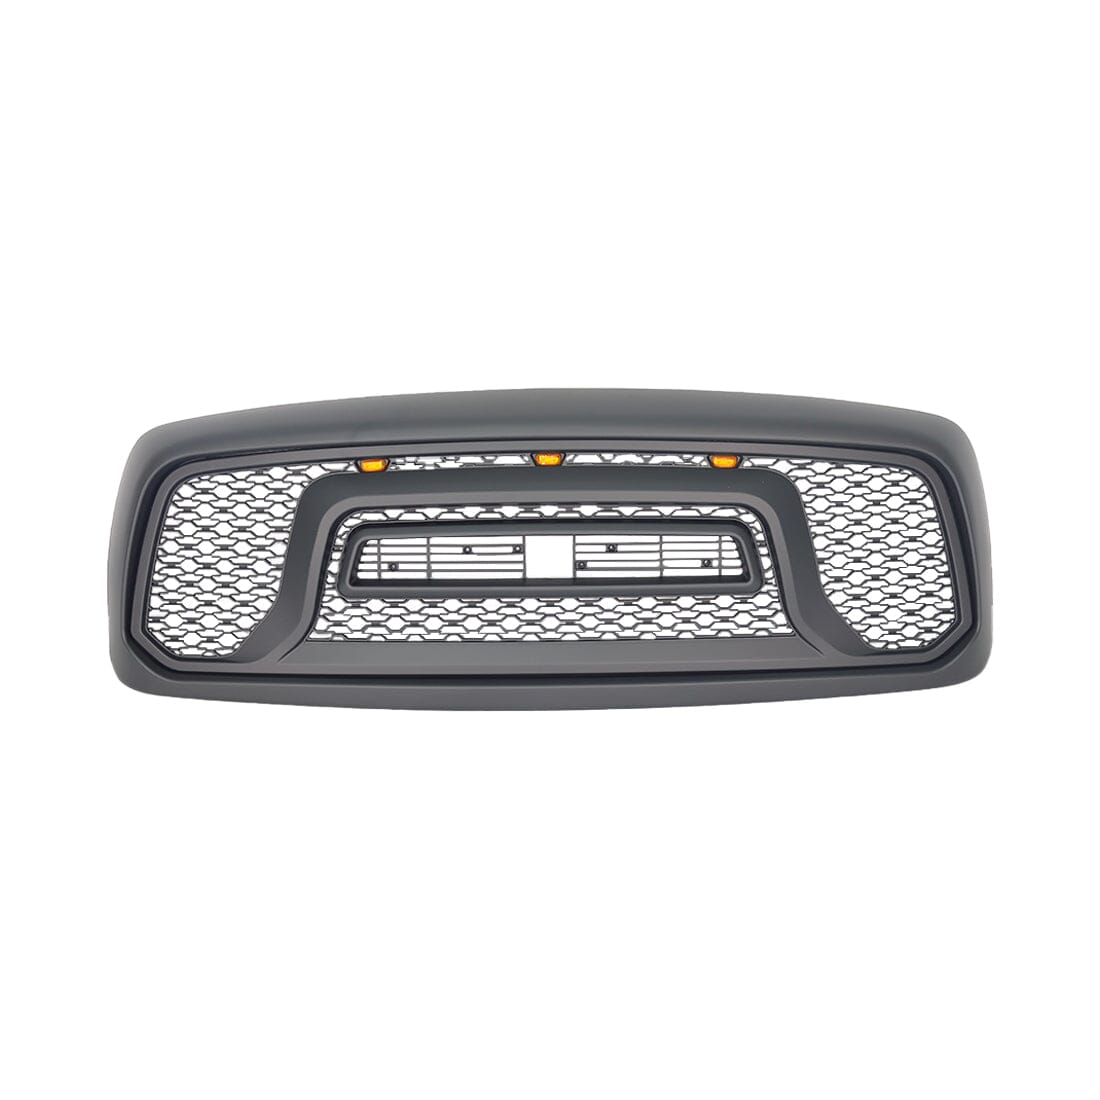 Rebel Style Front Grille W/Amber Led Lights For 2002-2005 Dodge Ram 1500 | Amoffroad